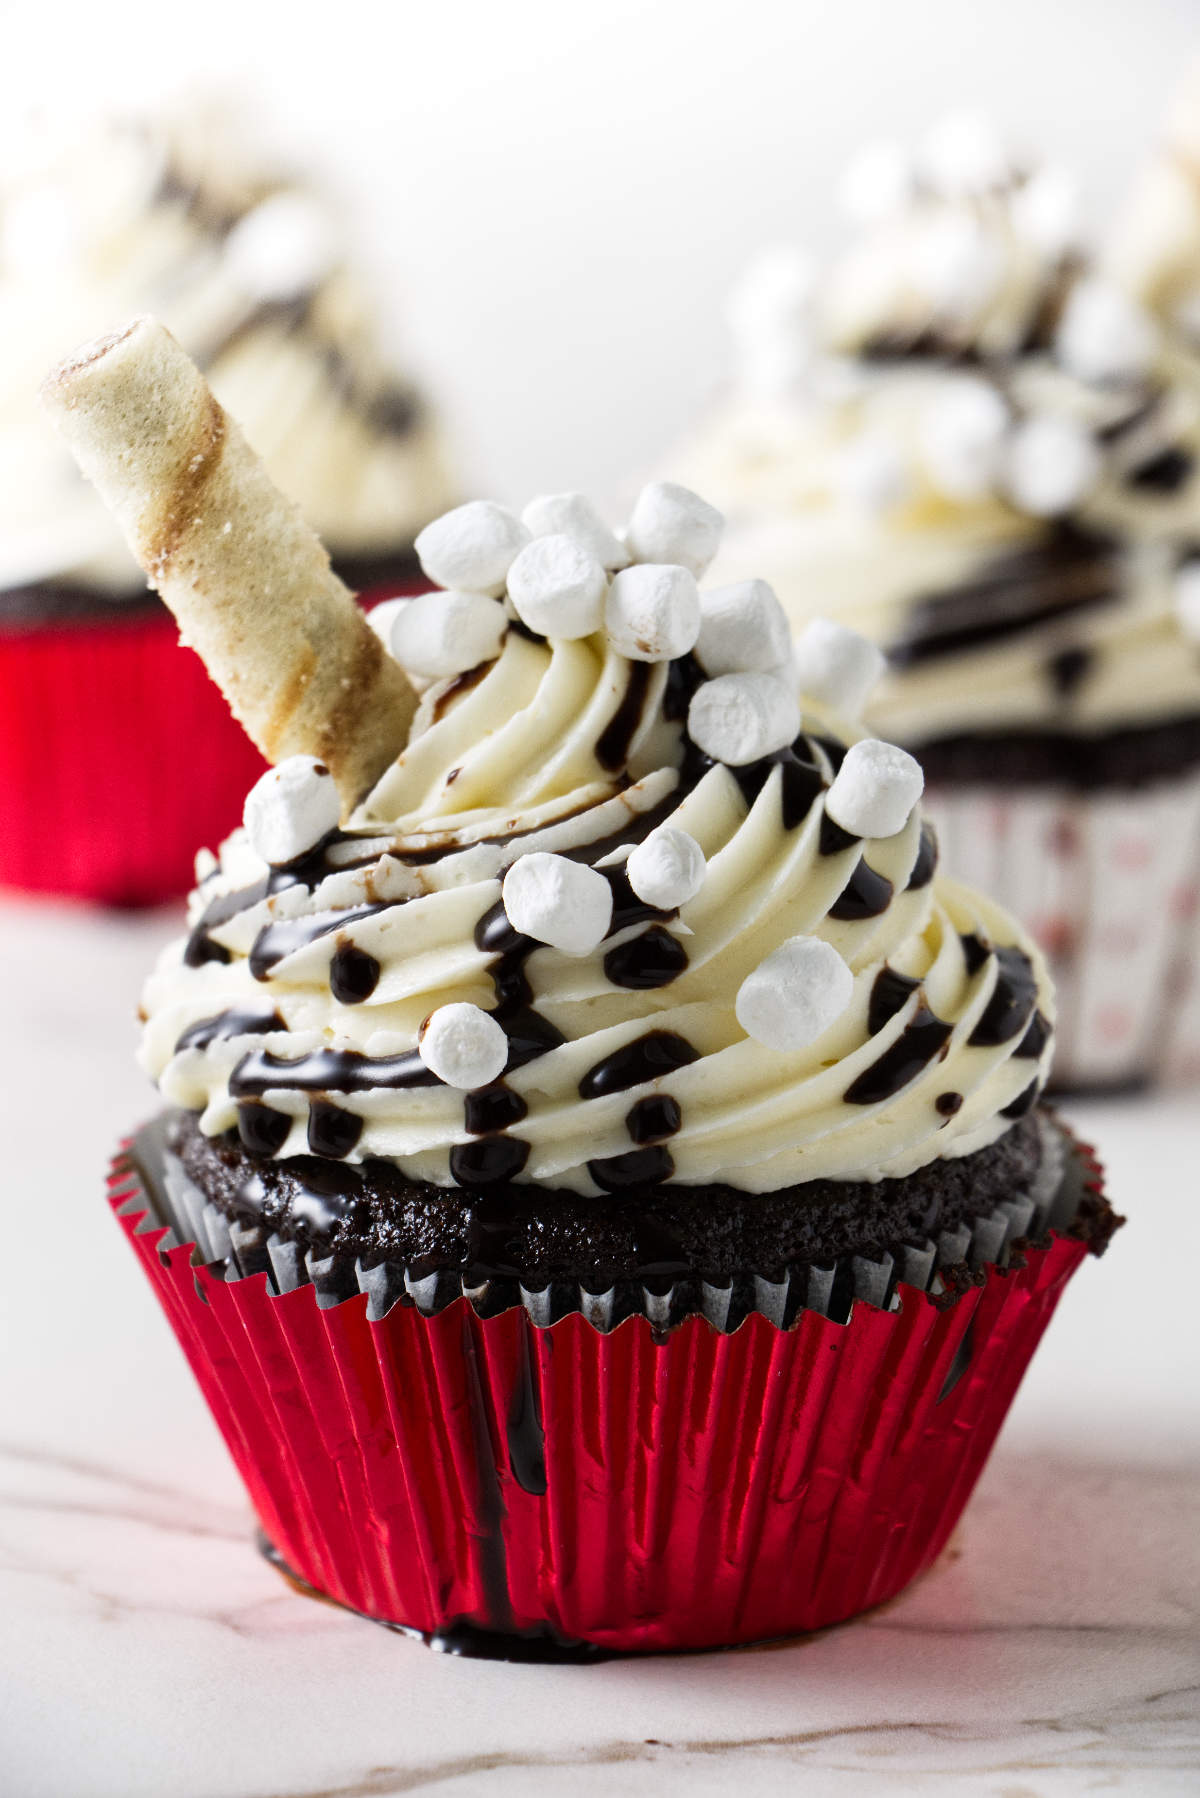 A chocolate cupcake with marshmallow buttercream.